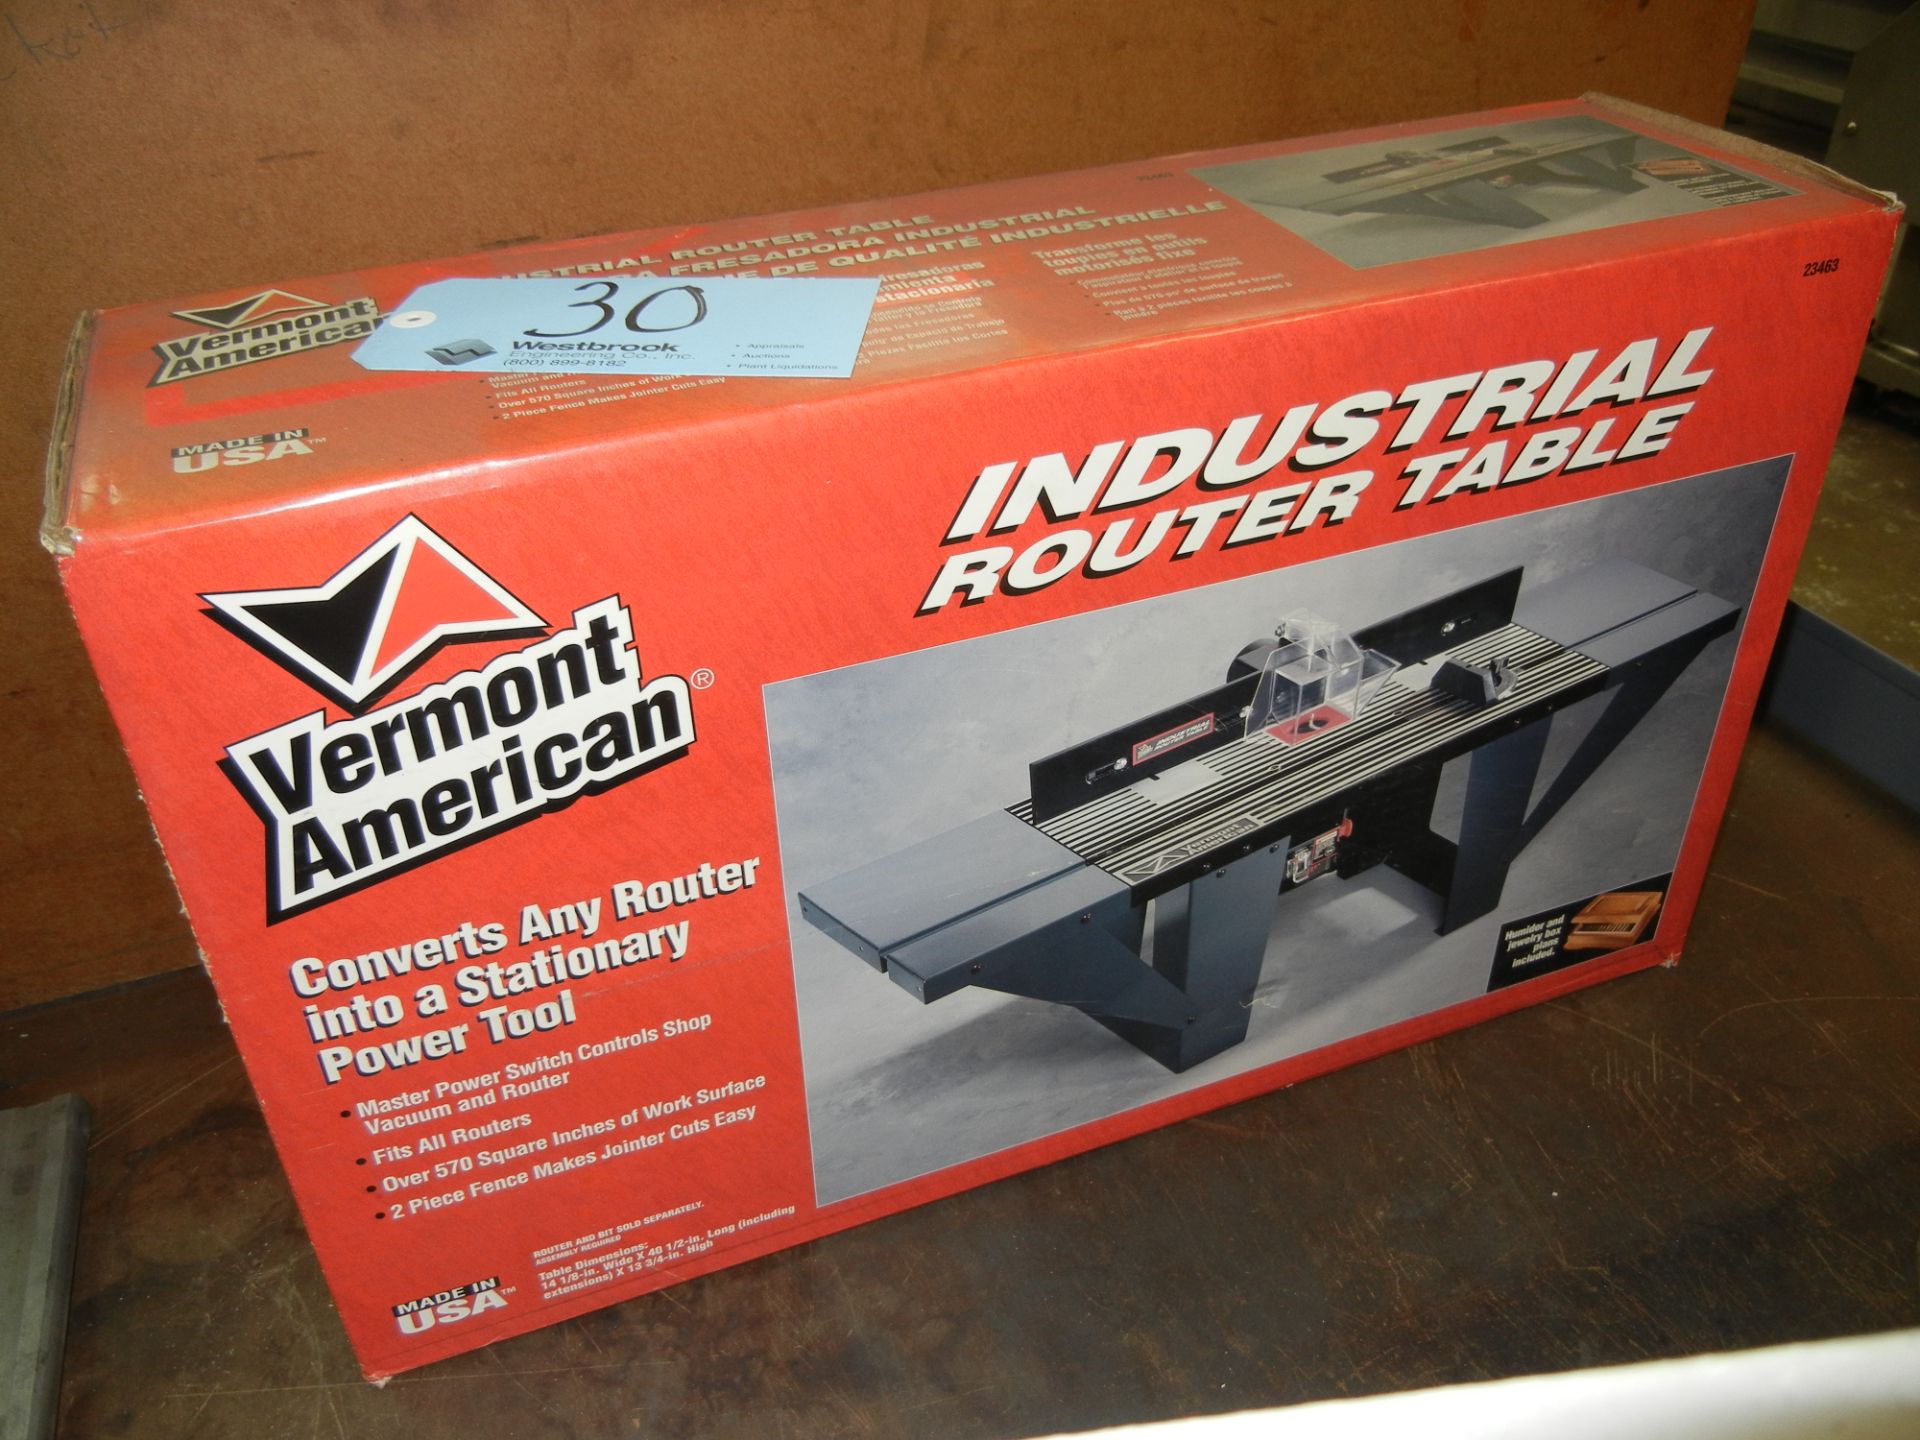 VERMONT AMERICAN Industrial Router Table (New in Box)